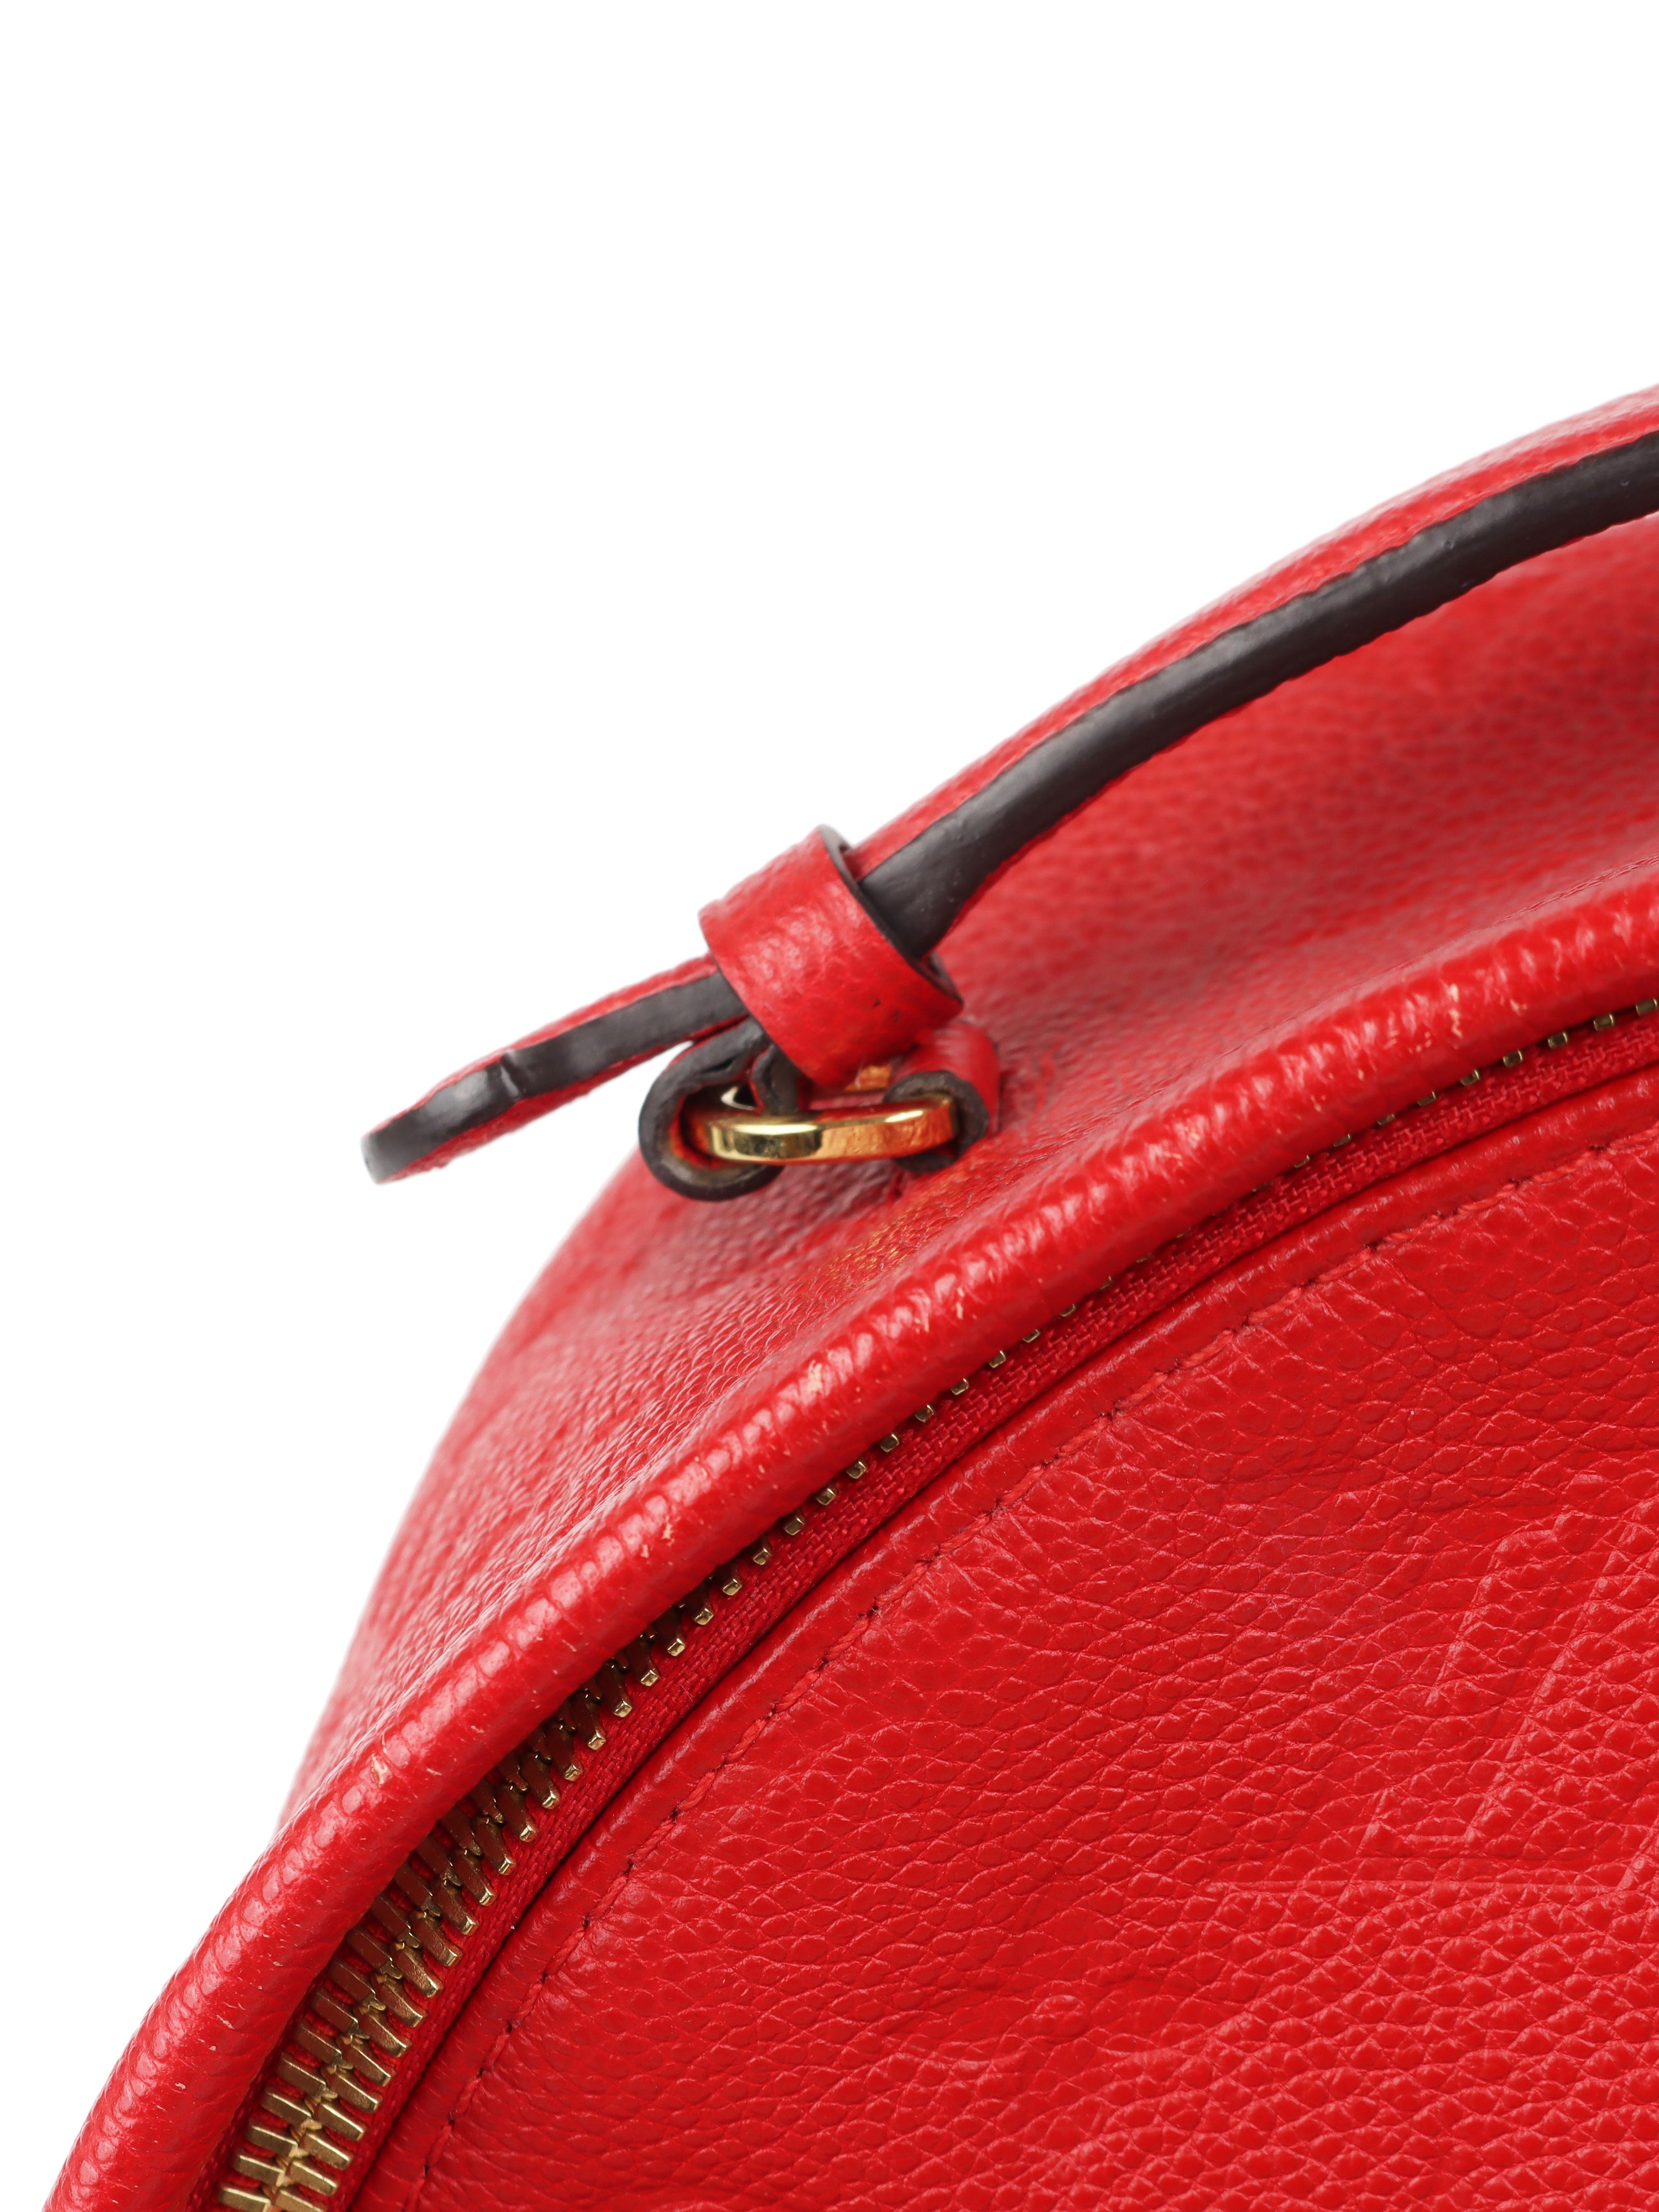 Louis Vuitton Red Sorbonne Backpack